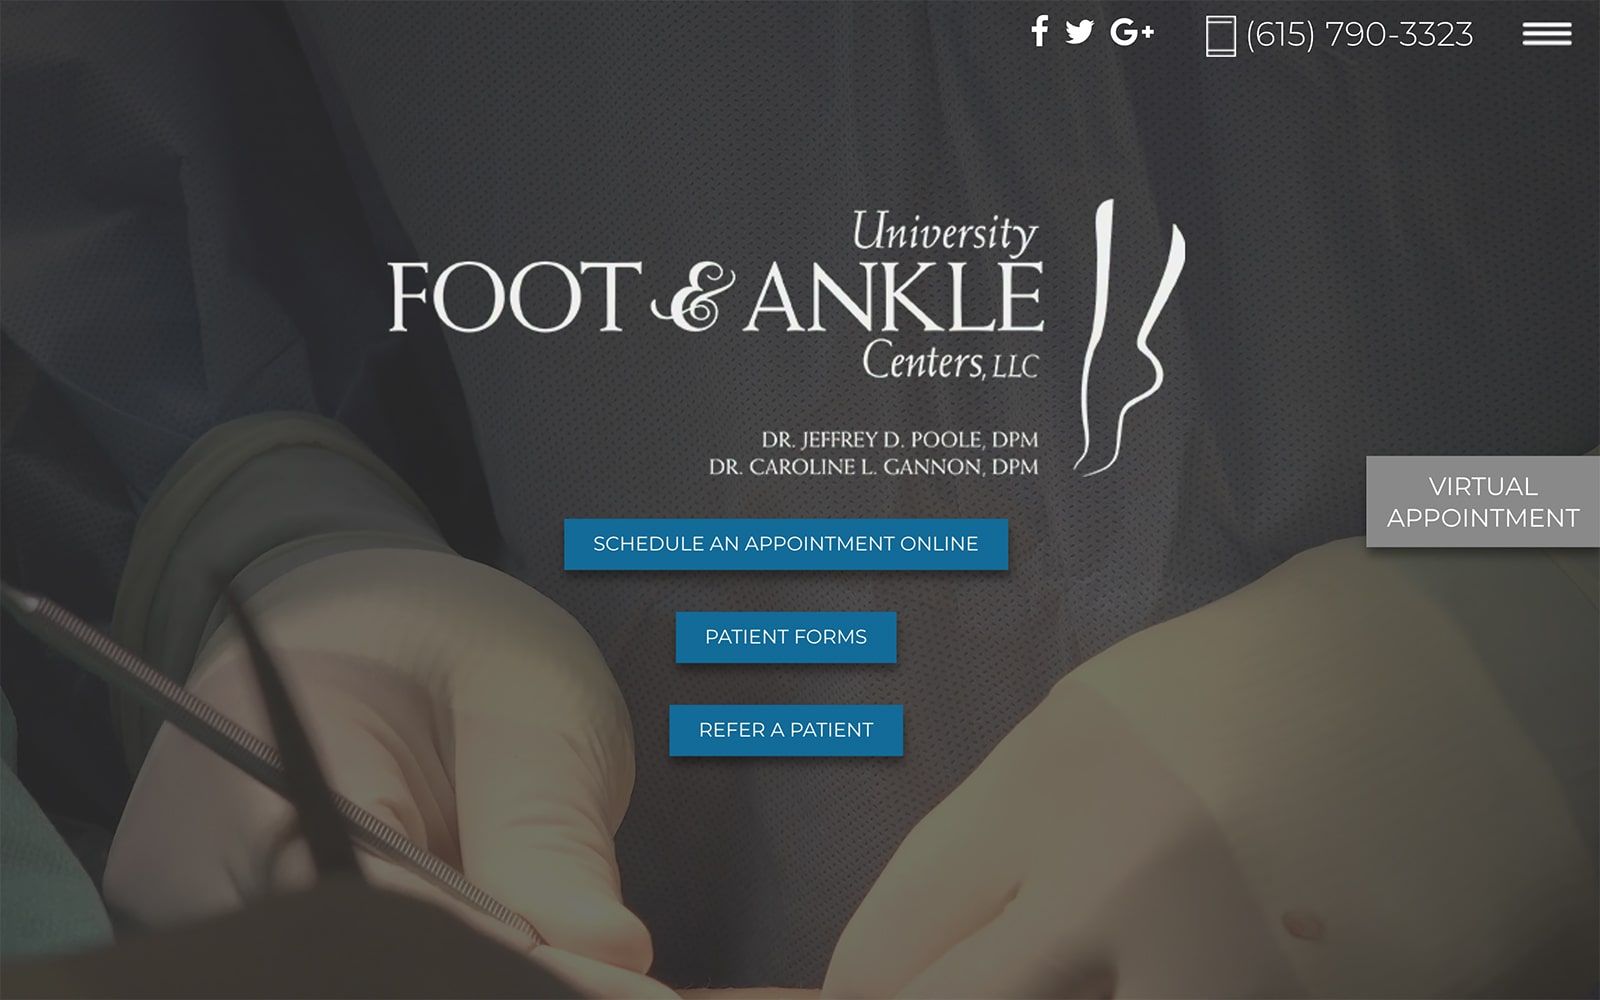 University Foot and Ankle Video Website